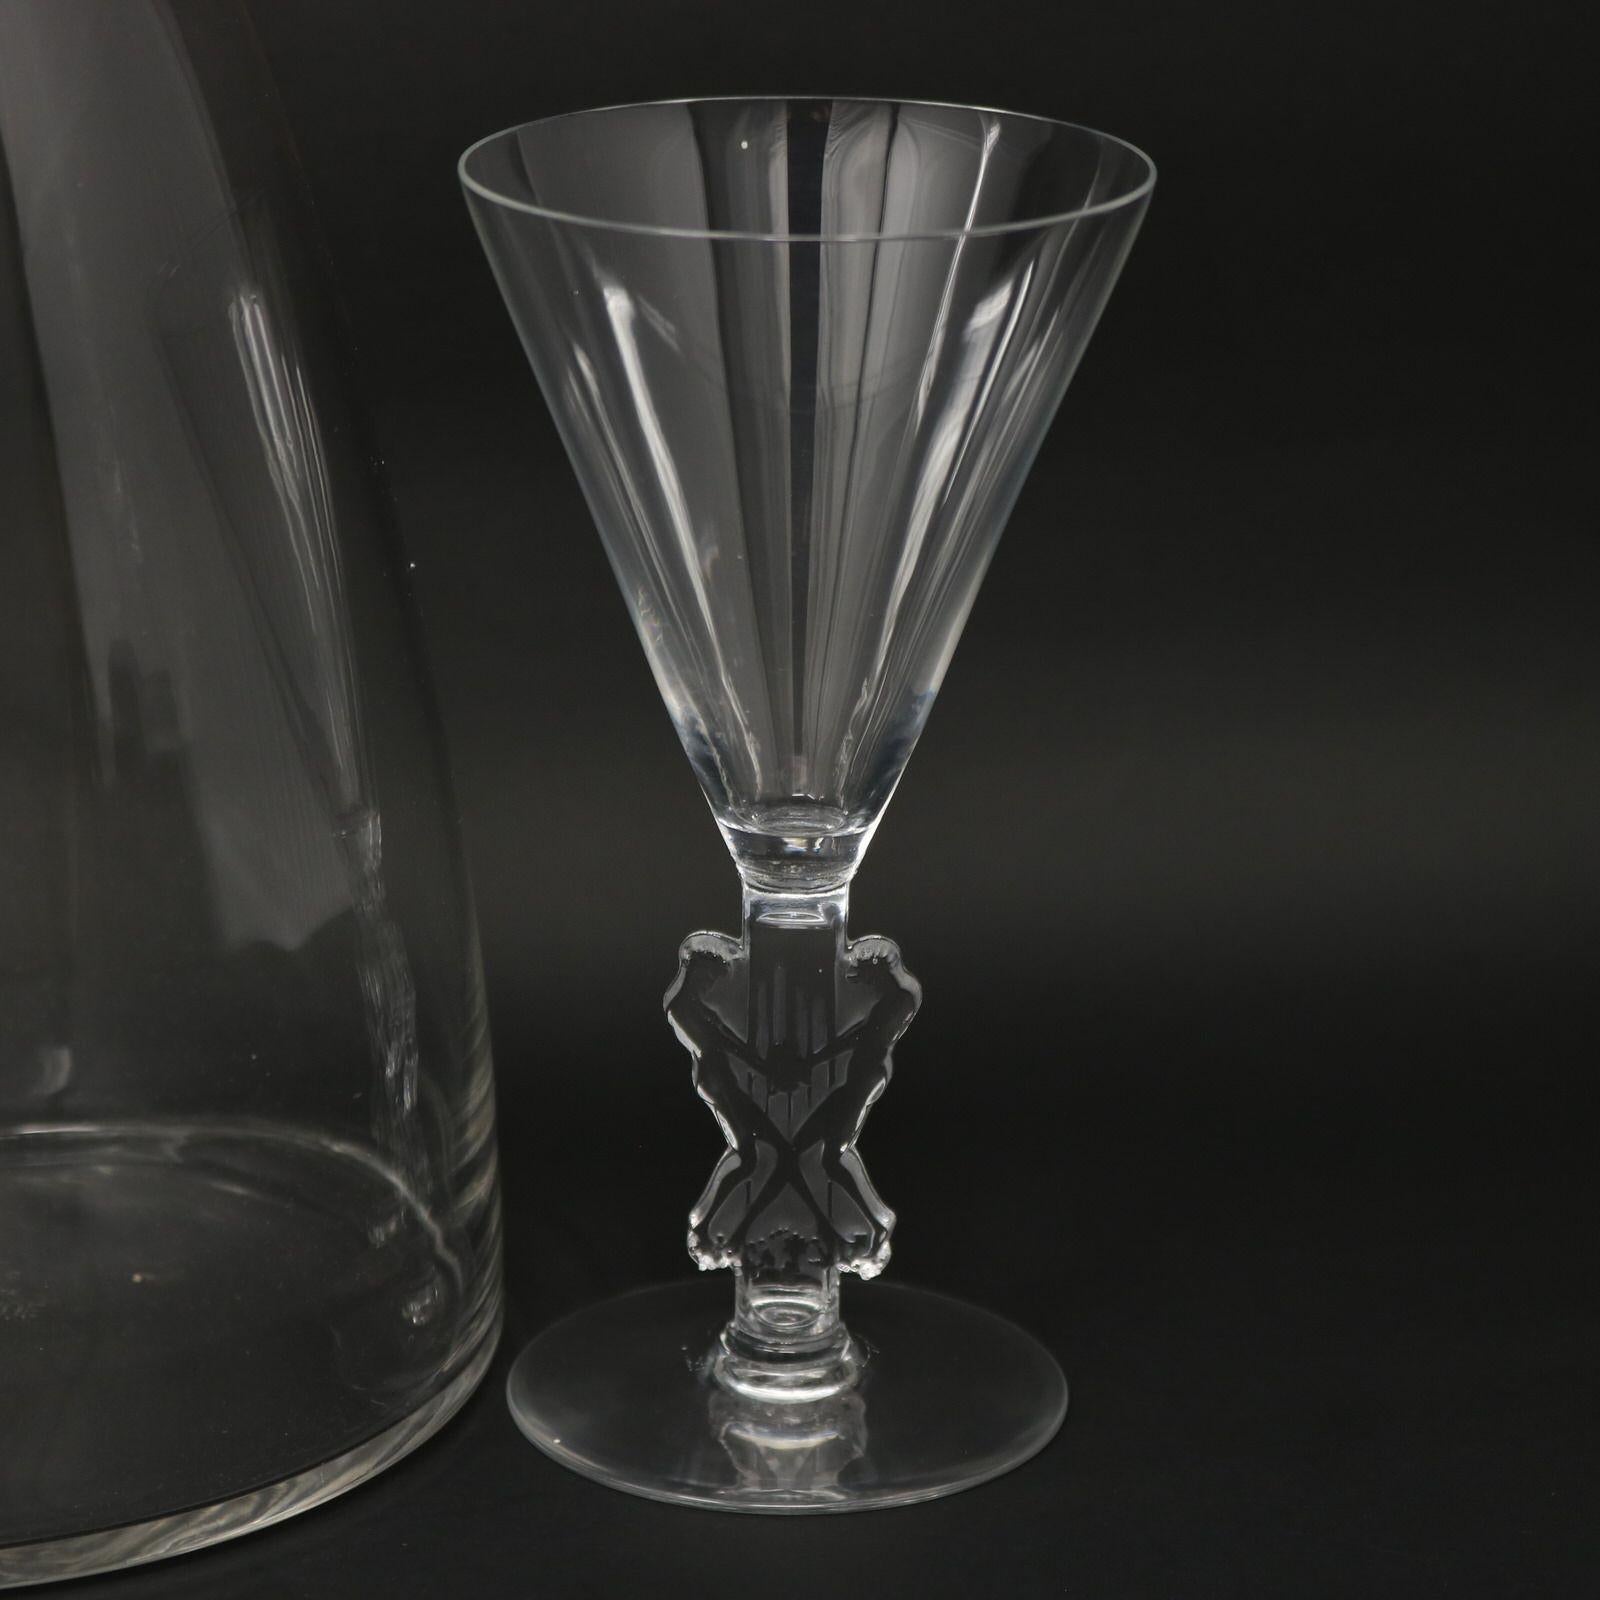 French Rene Lalique Glass Decanter with Pair of Glasses 'Strasbourg' Design